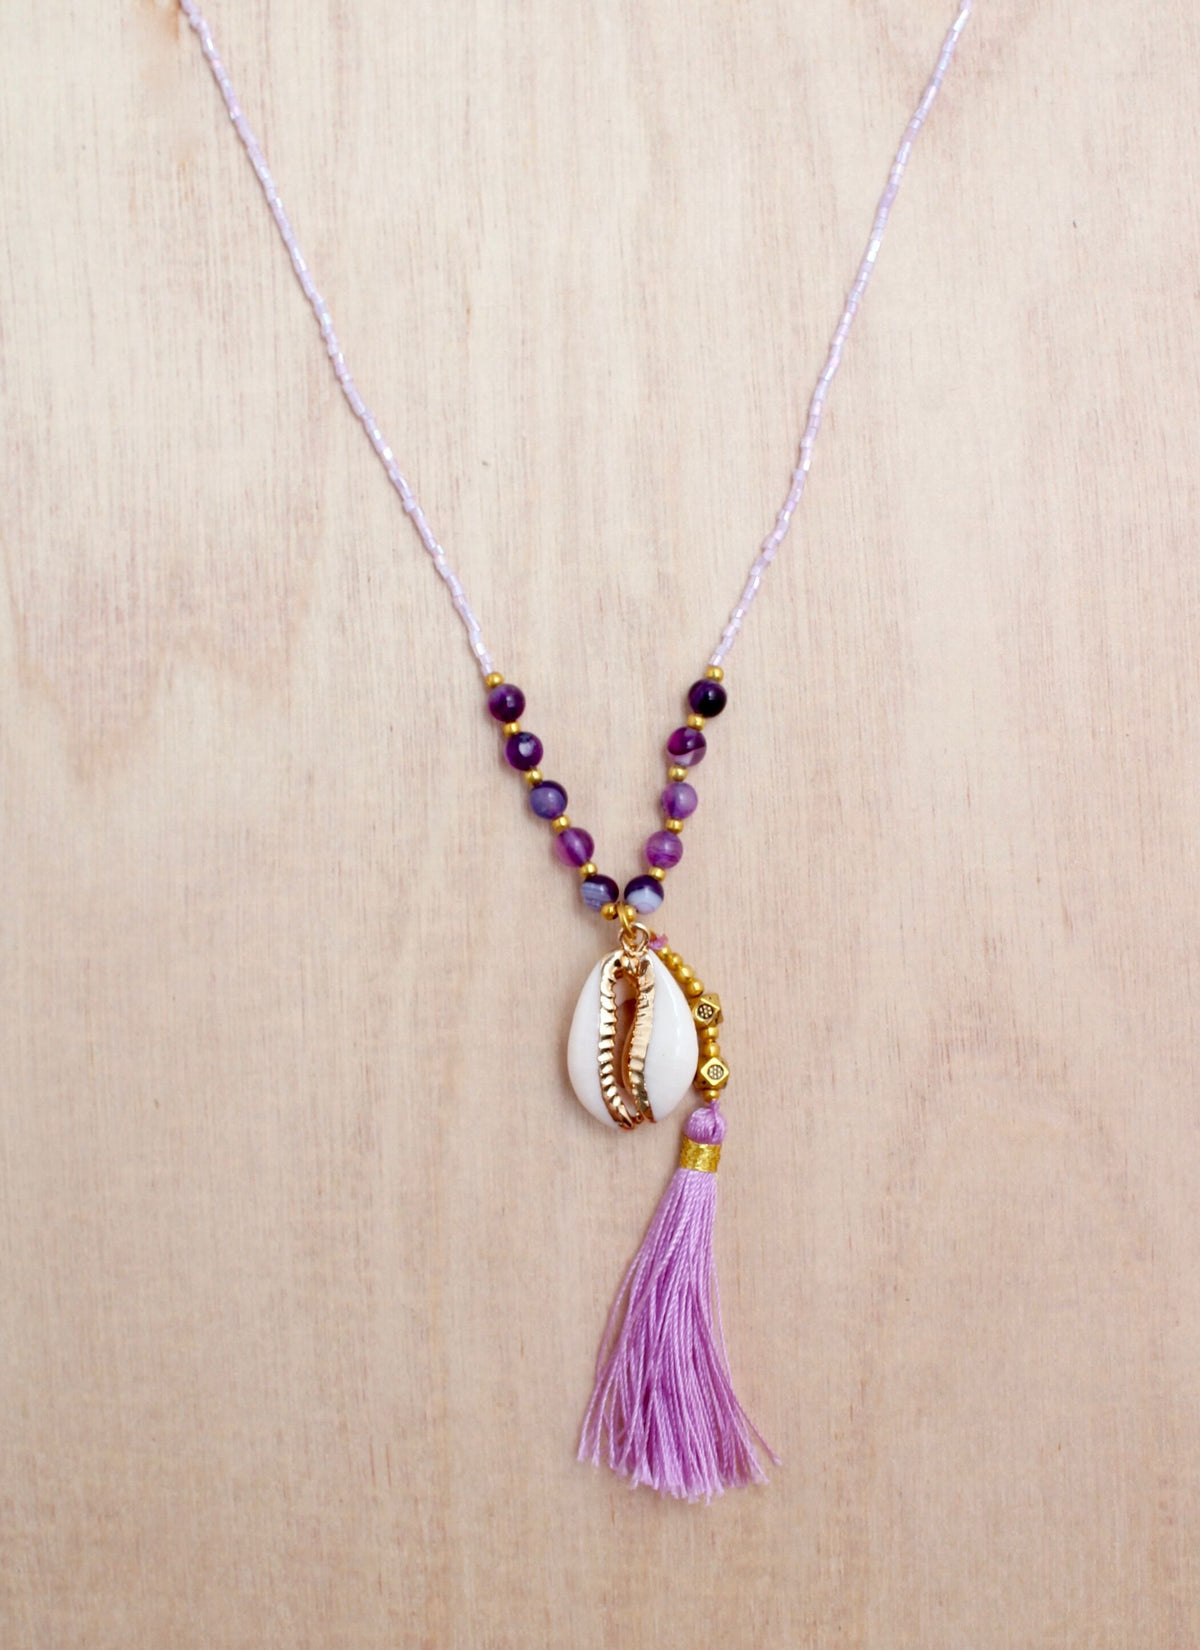  Bali queen, cowrie shells, cowrie jewelry, trendy, coco rose, tassel necklace 